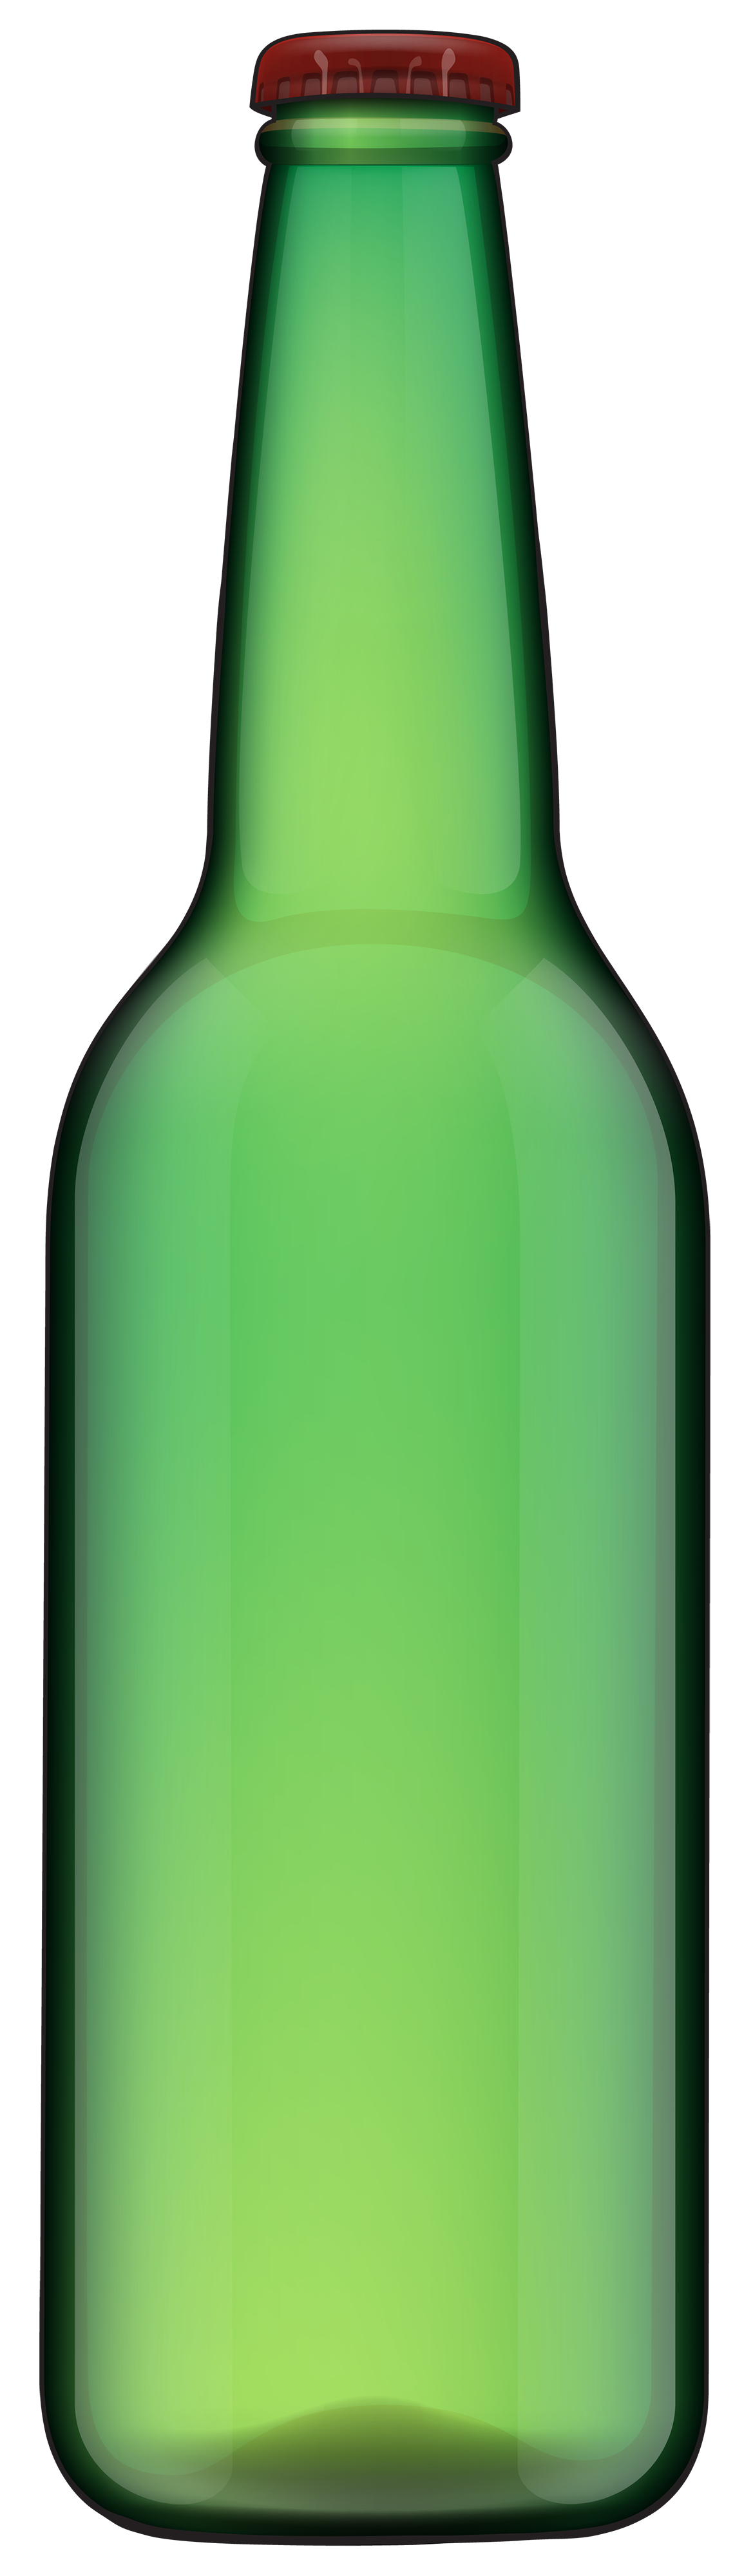 free clipart beer bottle - photo #31